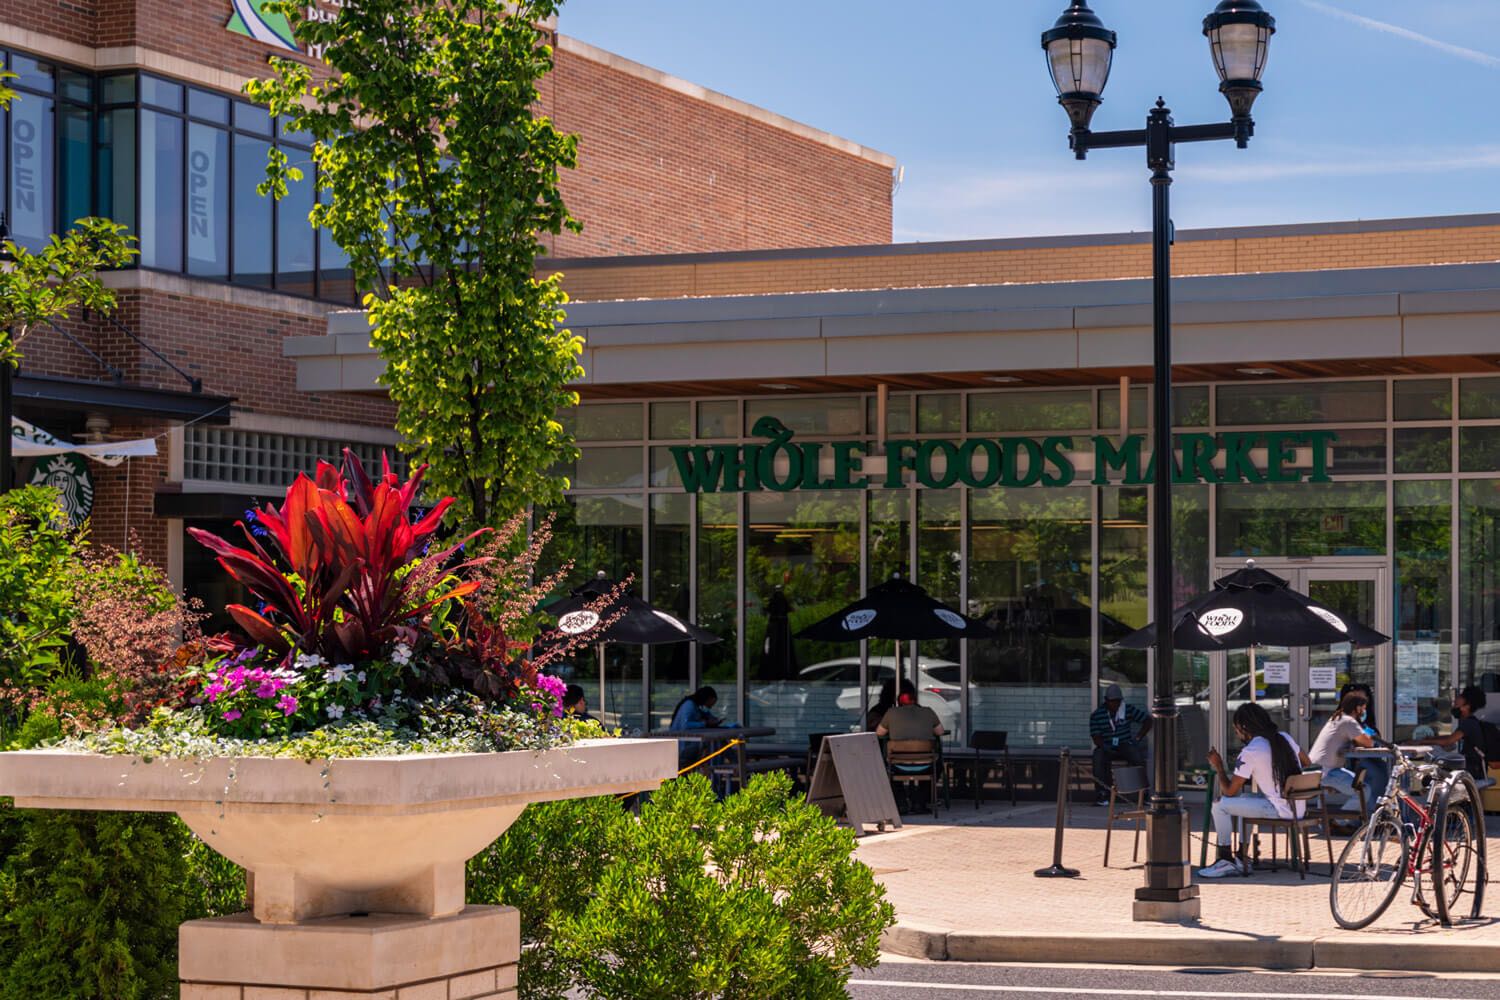 Whole Foods Market is right around the corner